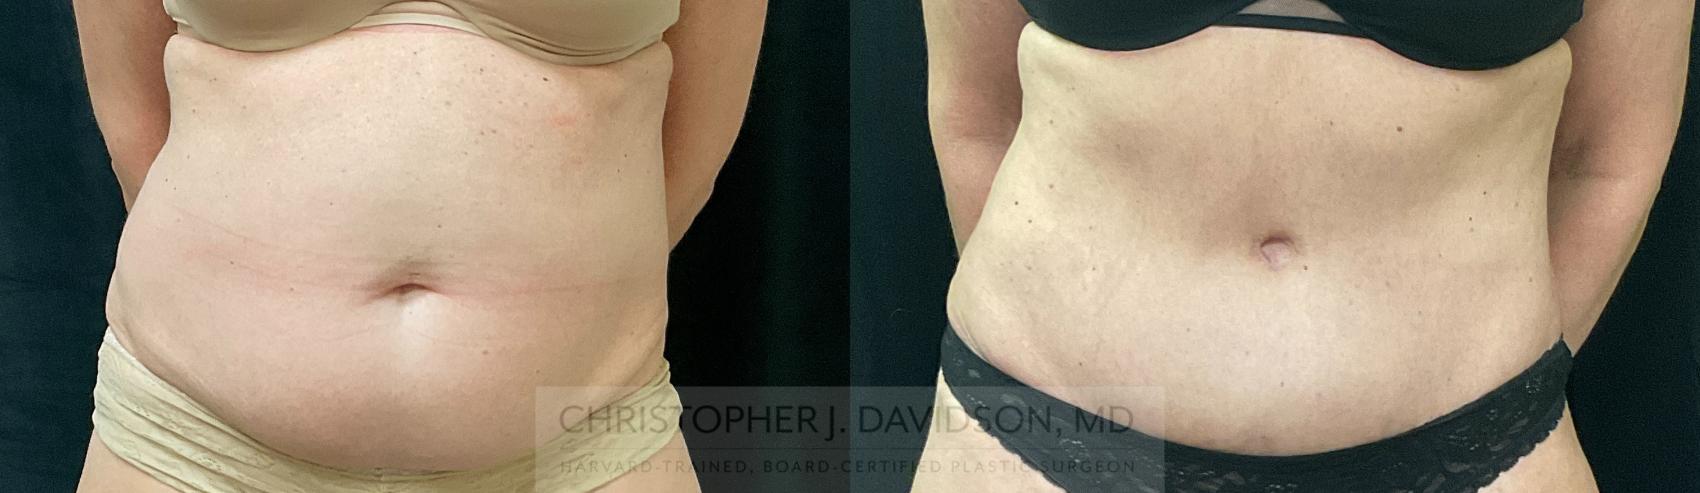 Tummy Tuck (Abdominoplasty) Case 342 Before & After Front | Boston, MA | Christopher J. Davidson, MD